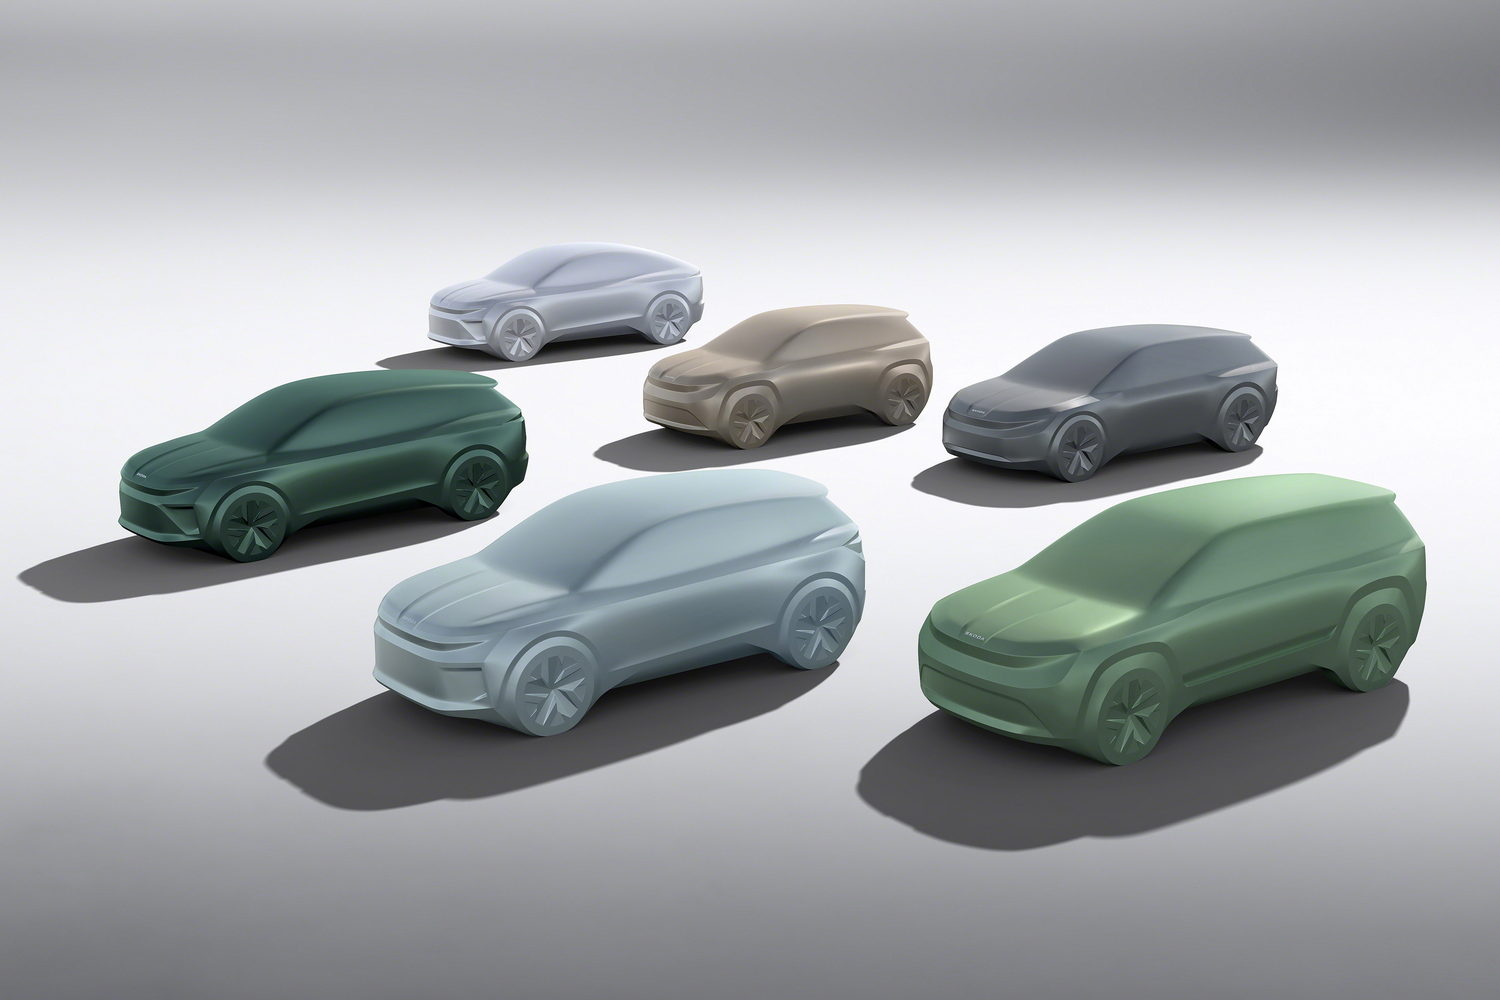 Car News | Skoda to launch four electric cars in 2026 | CompleteCar.ie